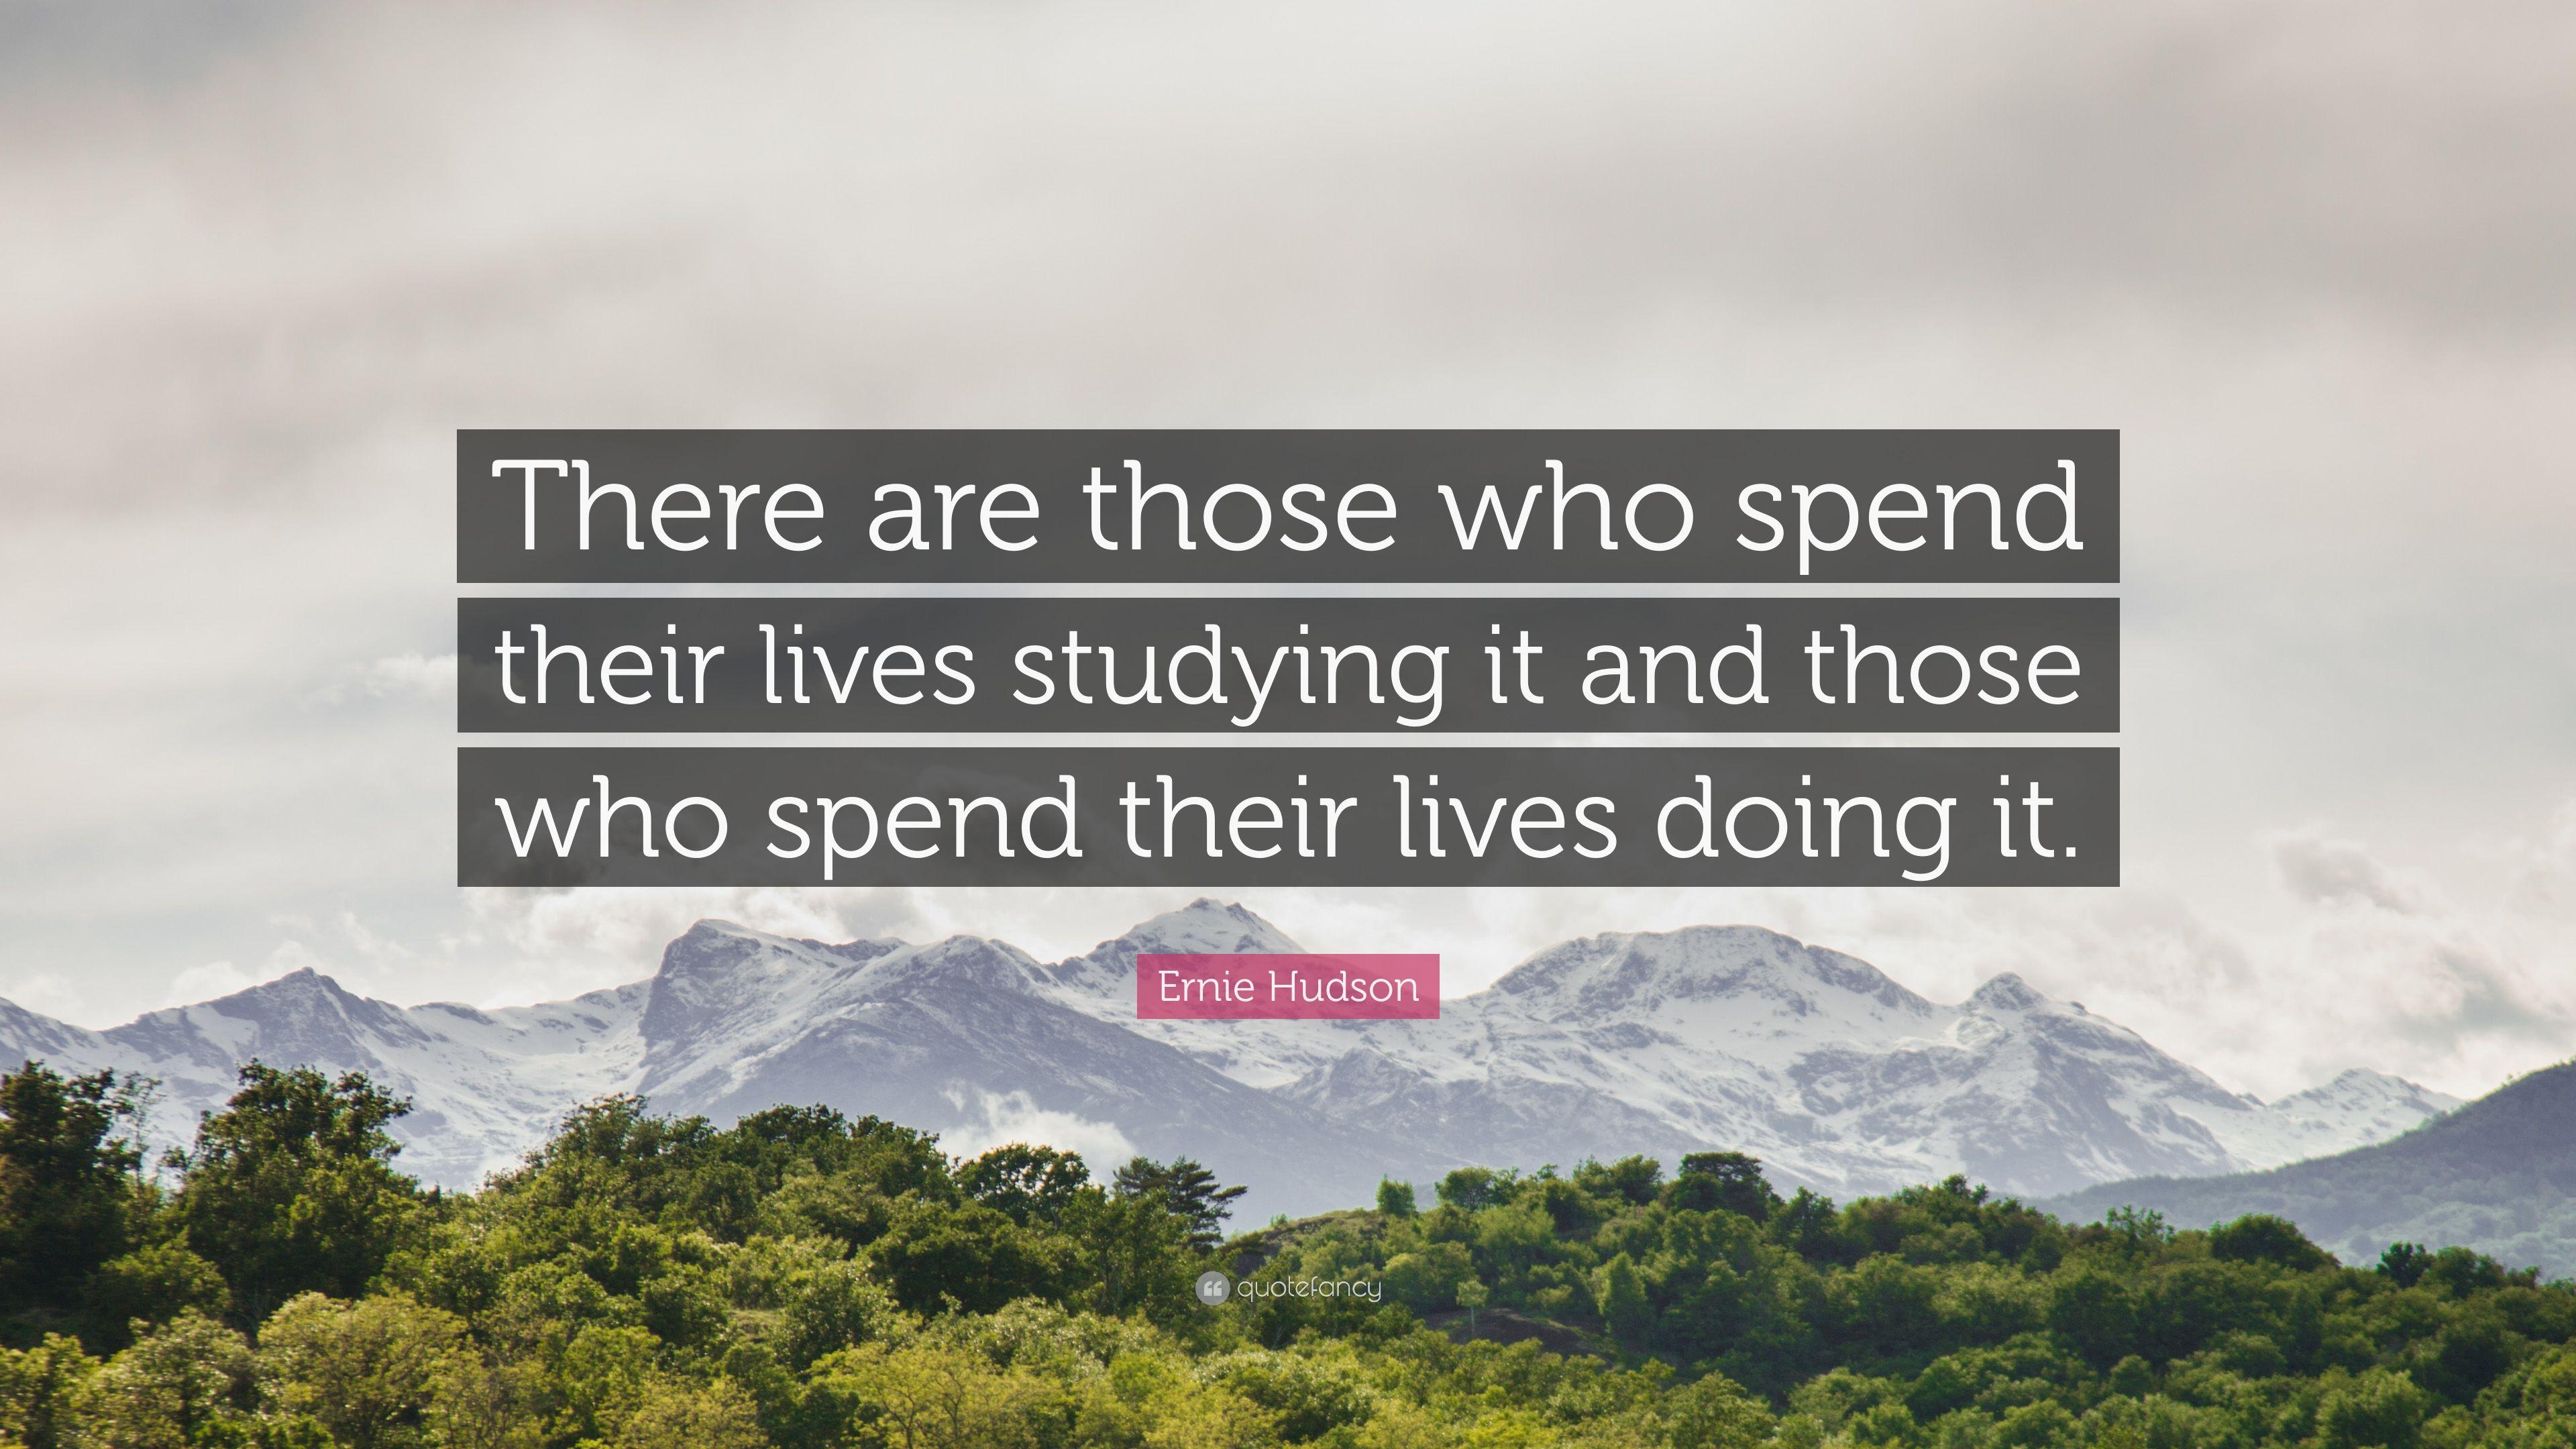 Ernie Hudson Quote: “There are those who spend their lives